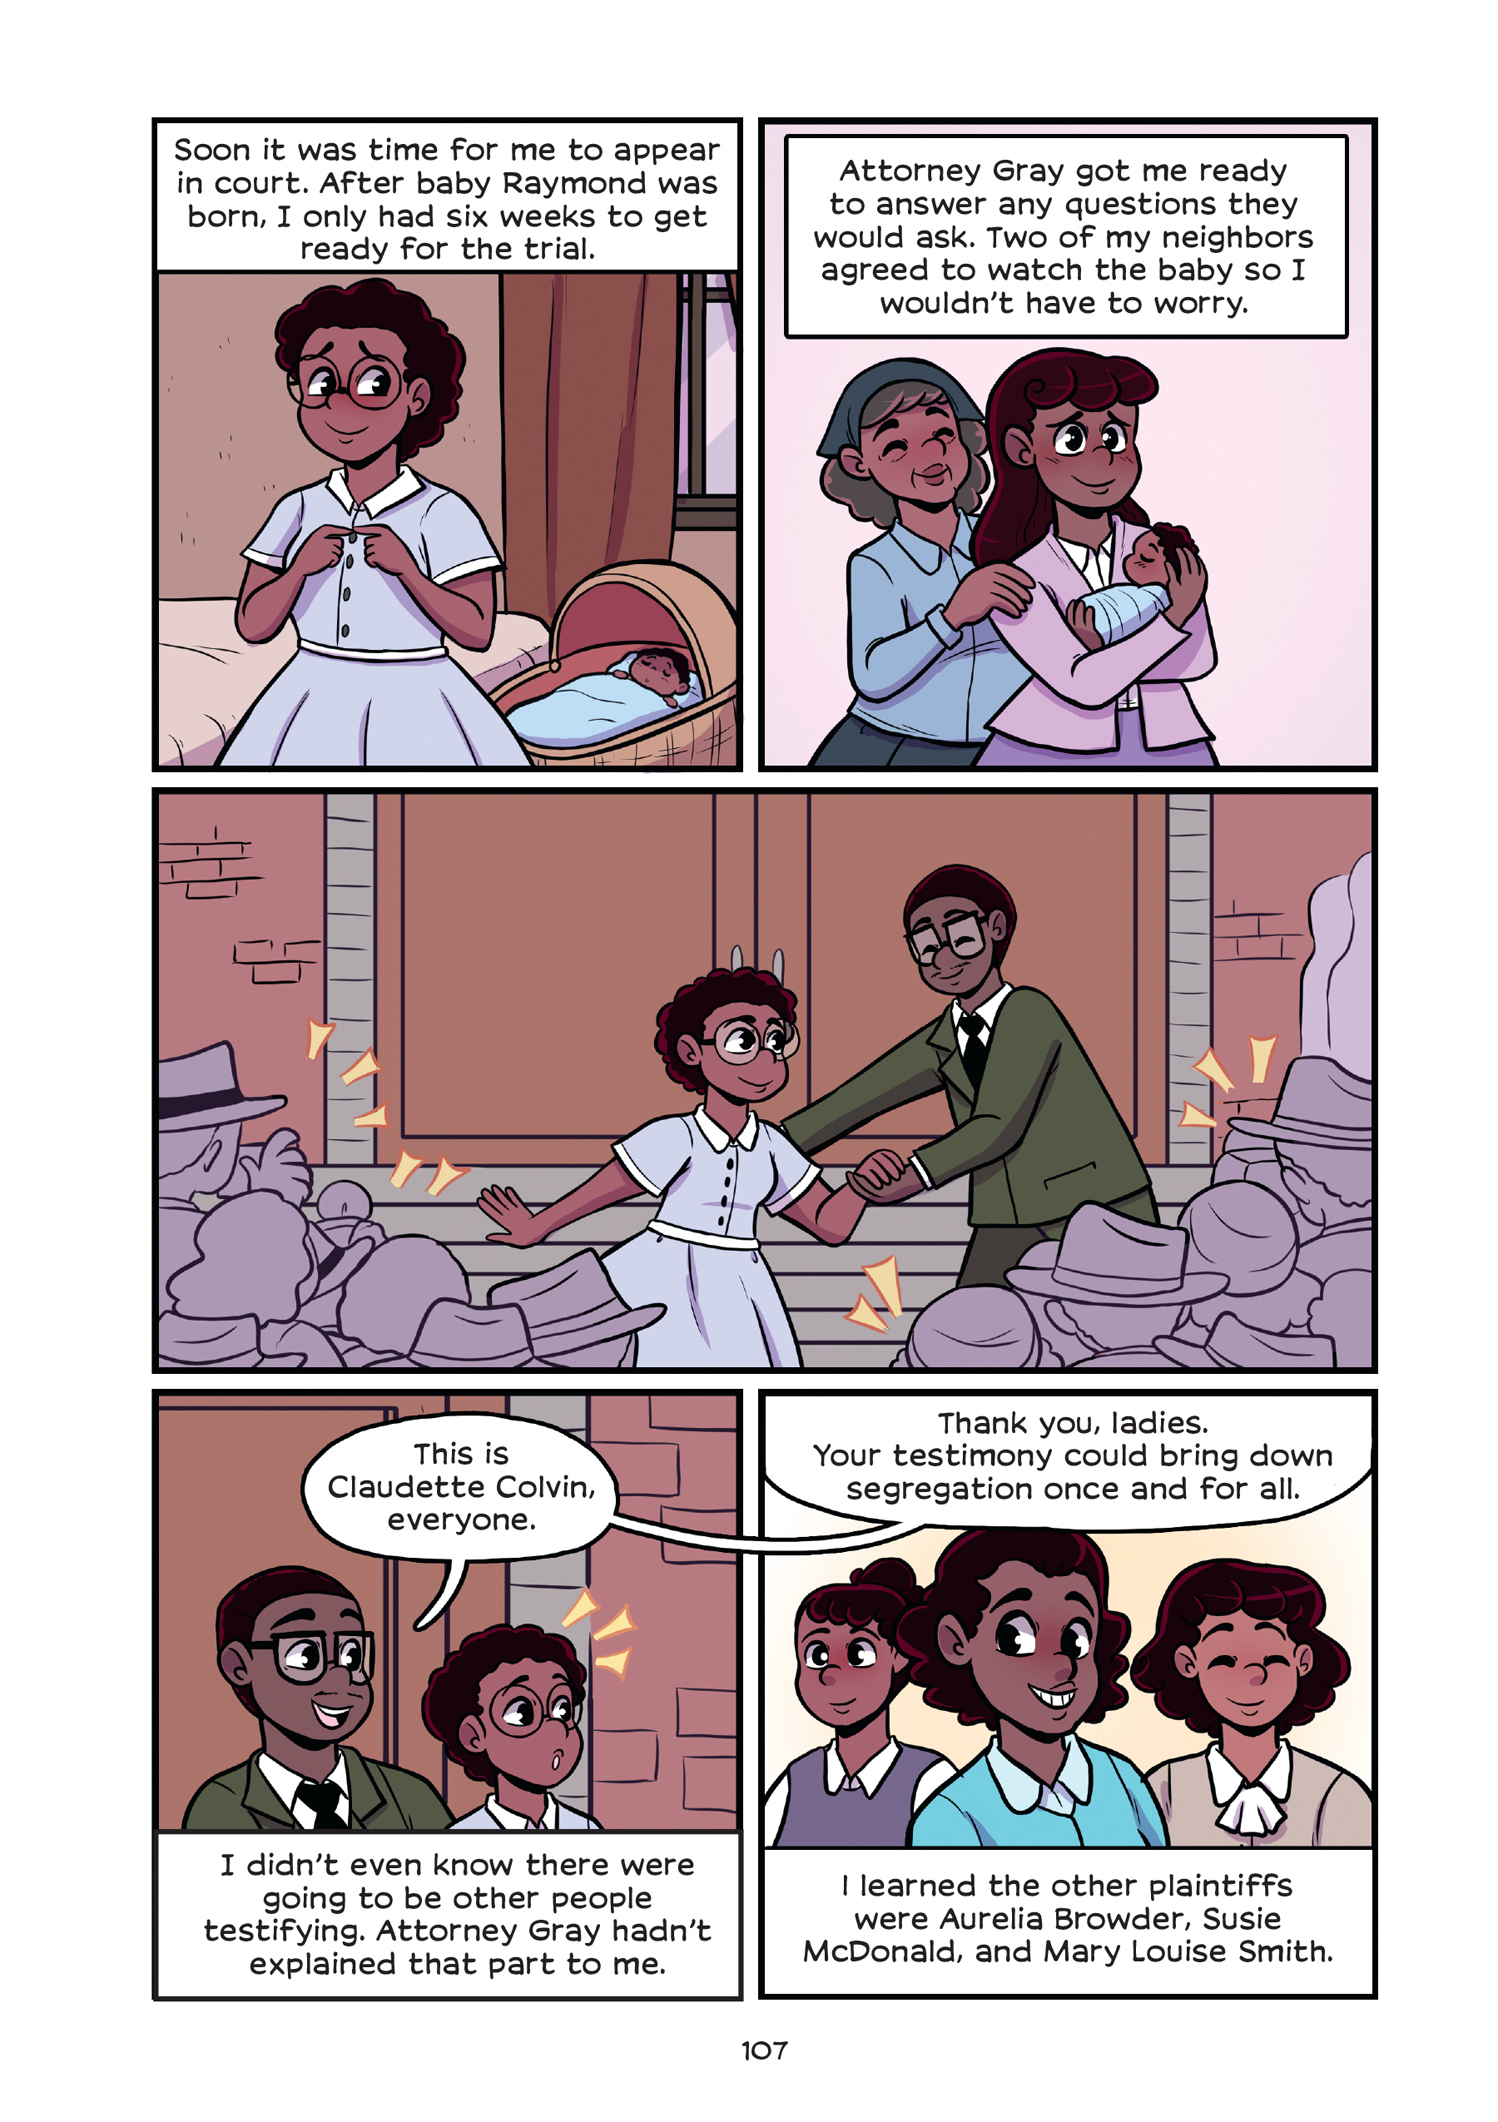 Read online History Comics comic -  Issue # Rosa Parks & Claudette Colvin - Civil Rights Heroes - 112